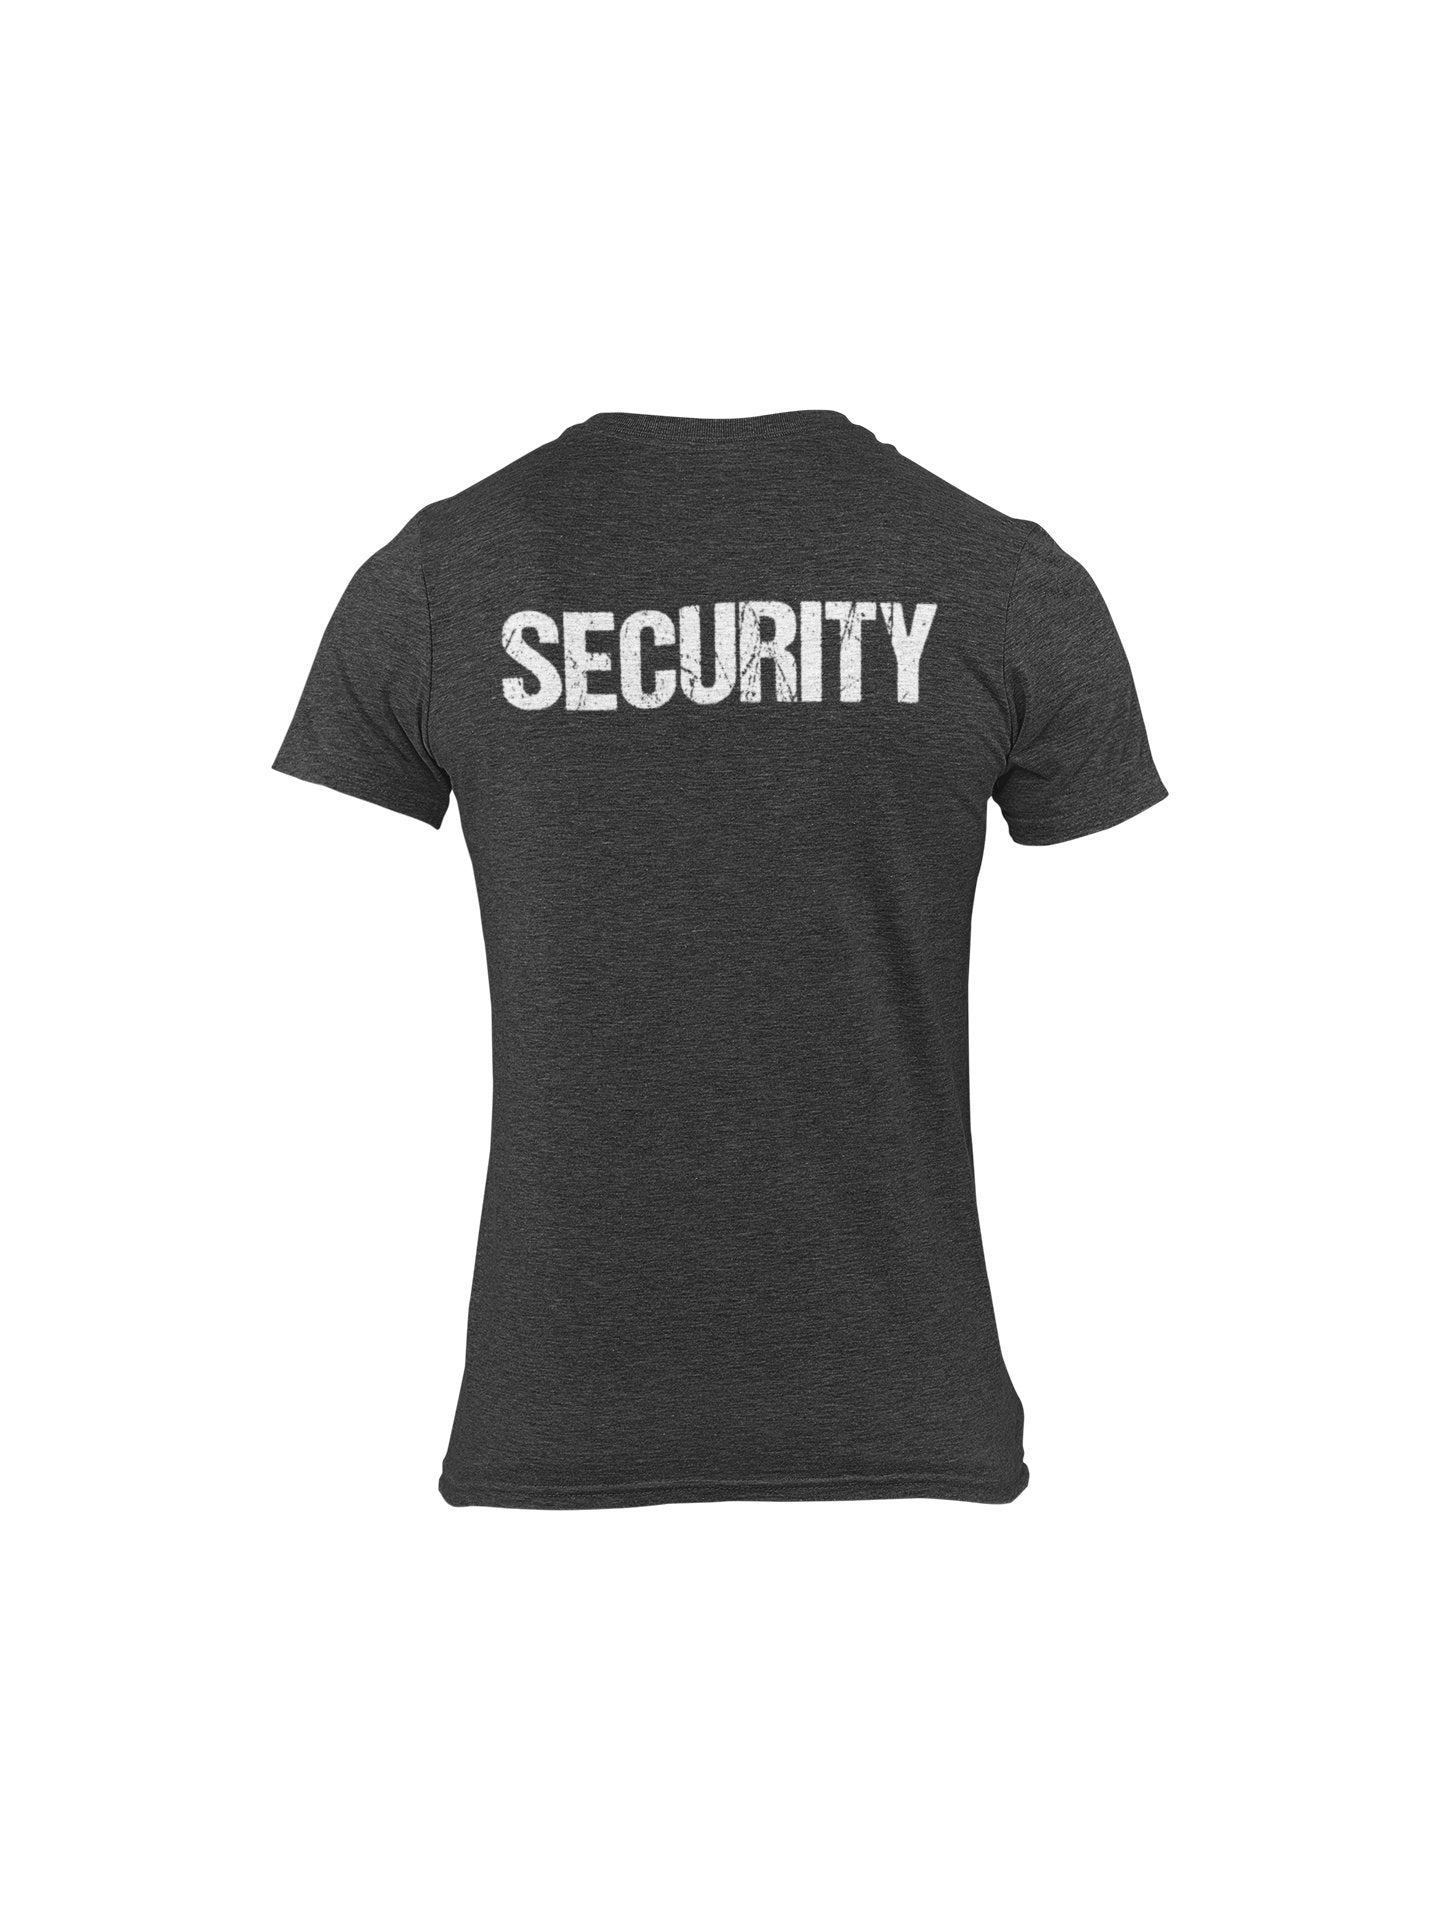 Security Men's Tee (Distressed Design, Heather Charcoal & White)